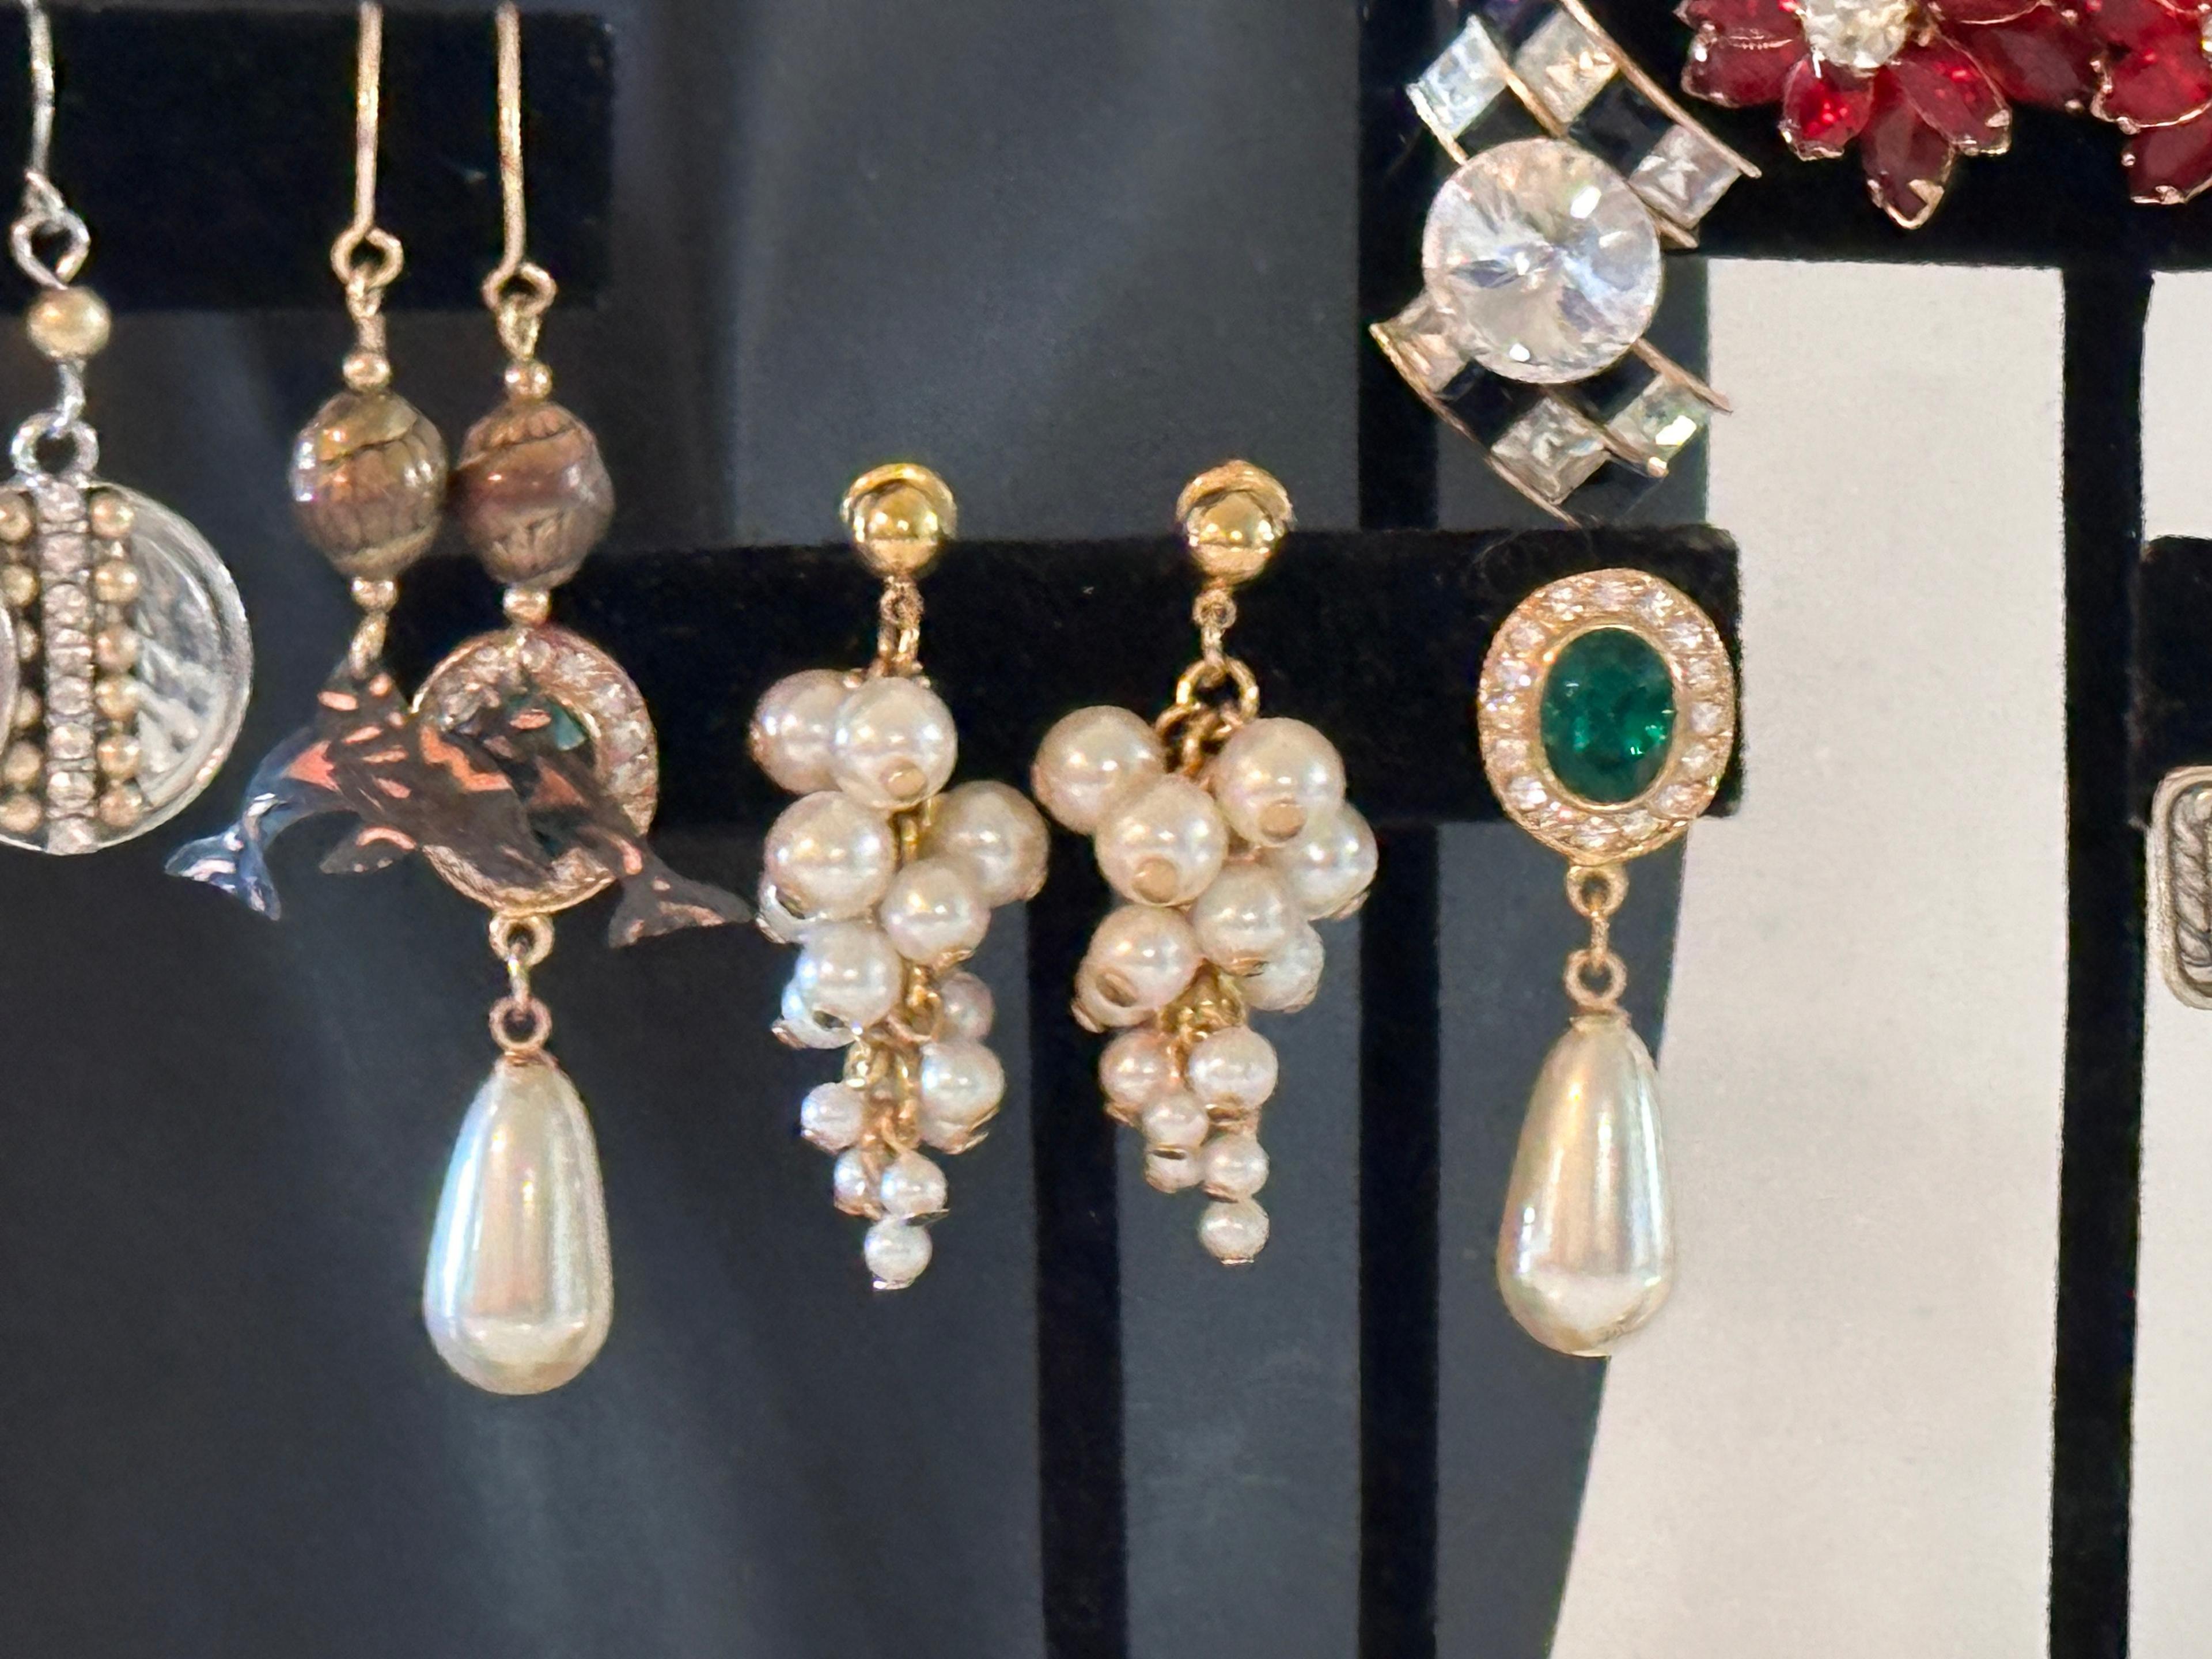 Variety of Women's Vintage Fashion Earrings